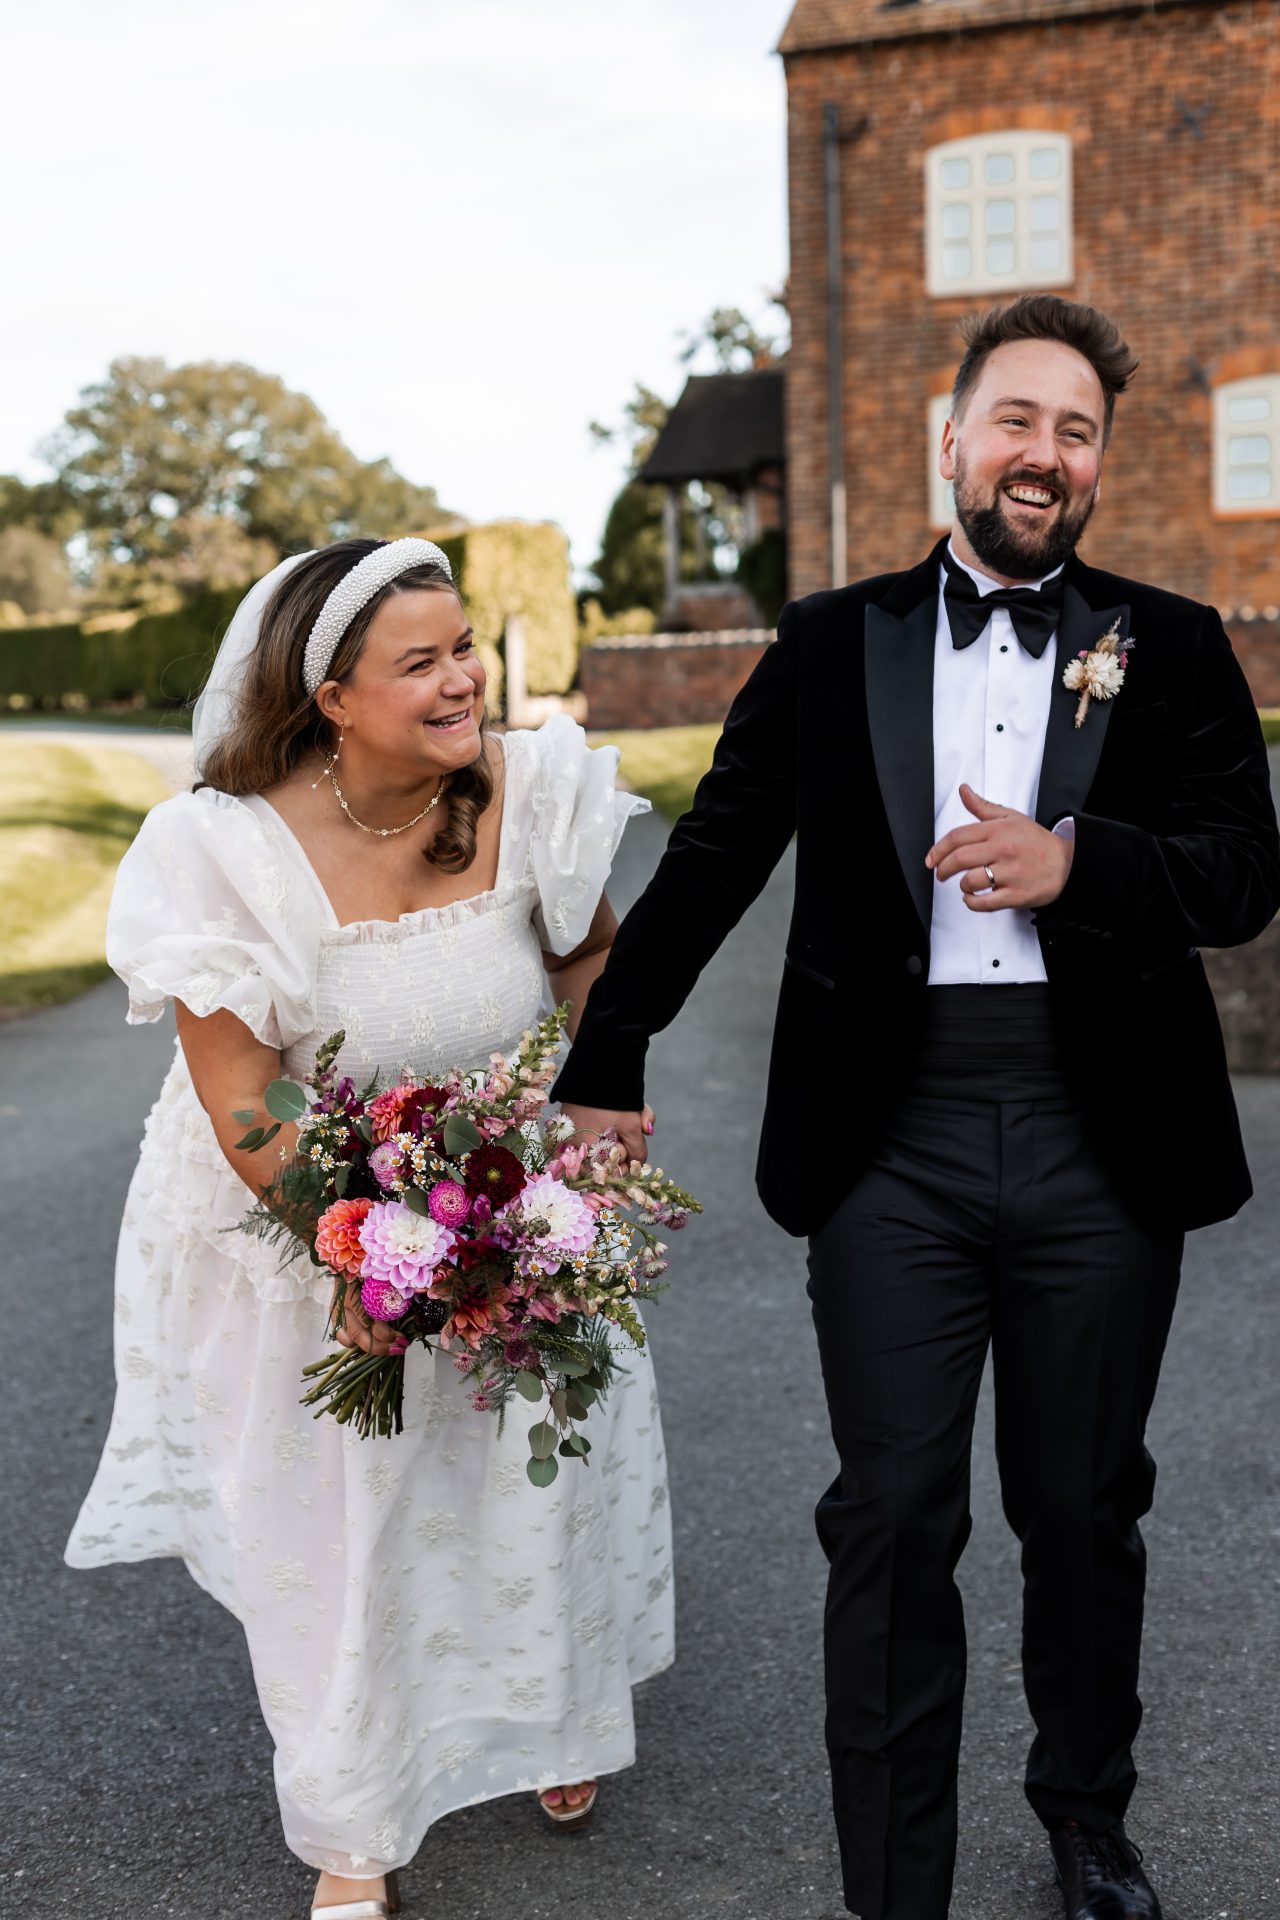 Newly married couple Catherine & Charlie, walking together hand-in-hand outside their wedding venue, Grange Barn, Cheshire. Isabelle B Photography